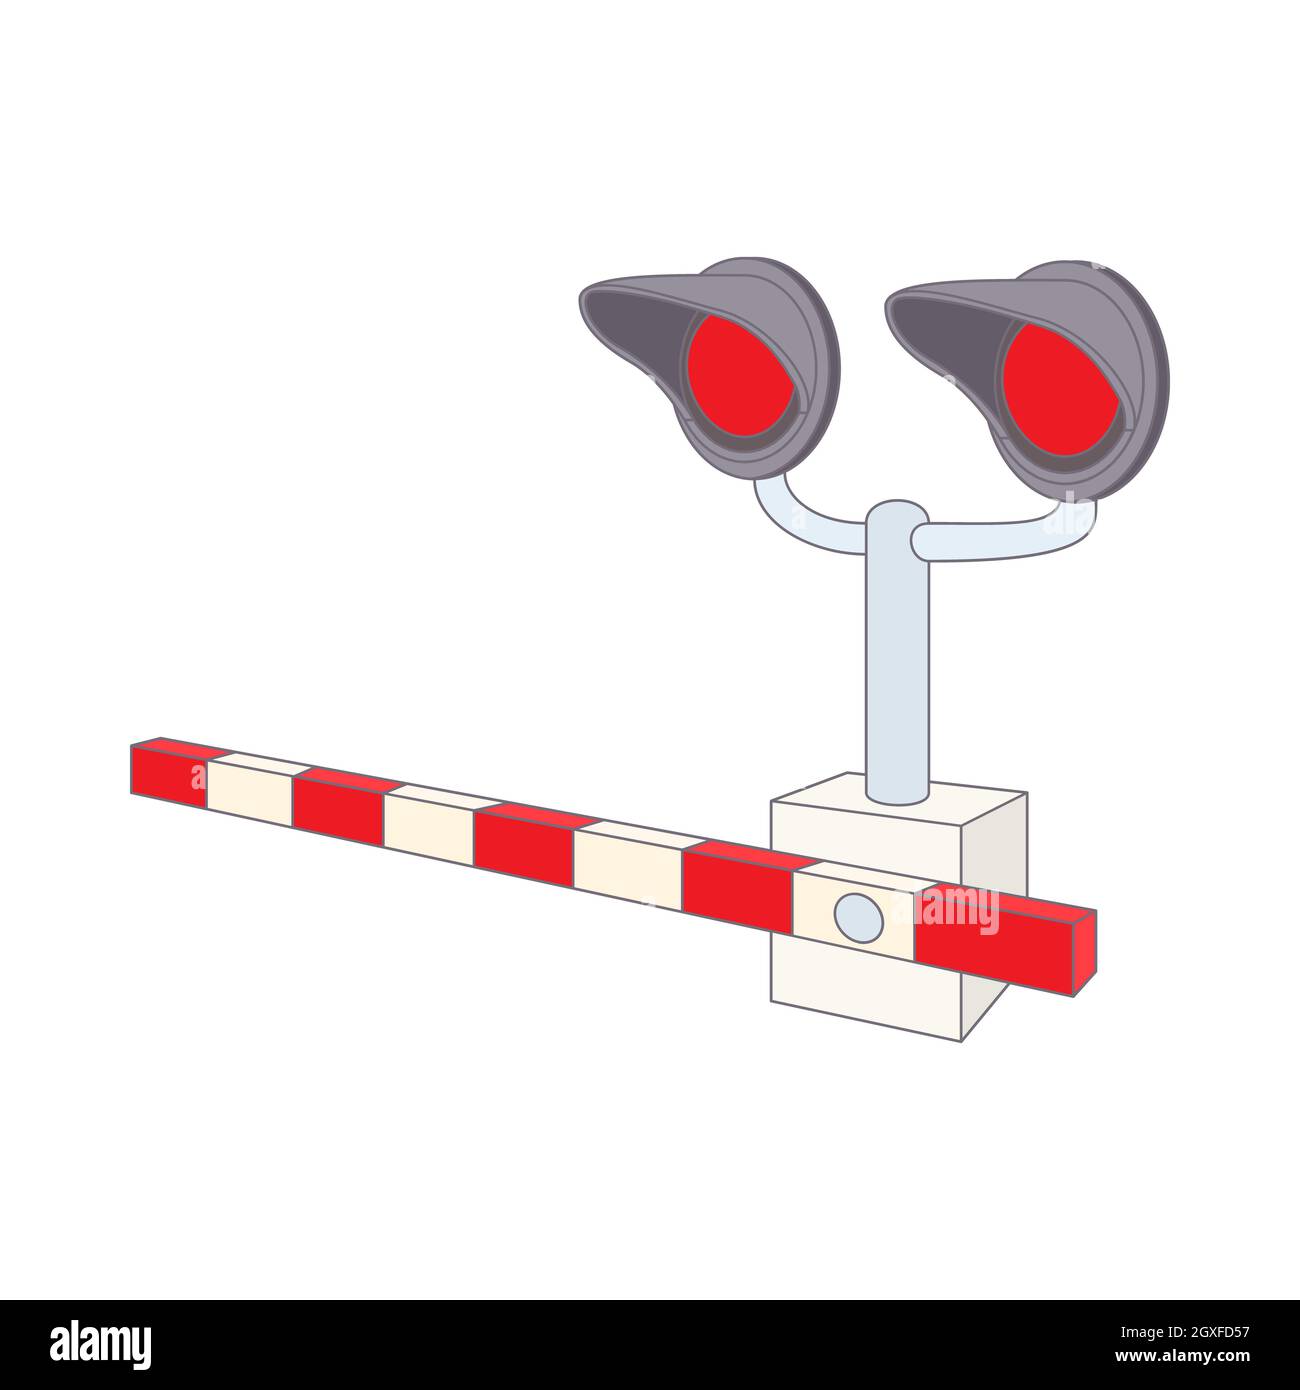 Railroad crossing icon in cartoon style on a white background Stock Photo